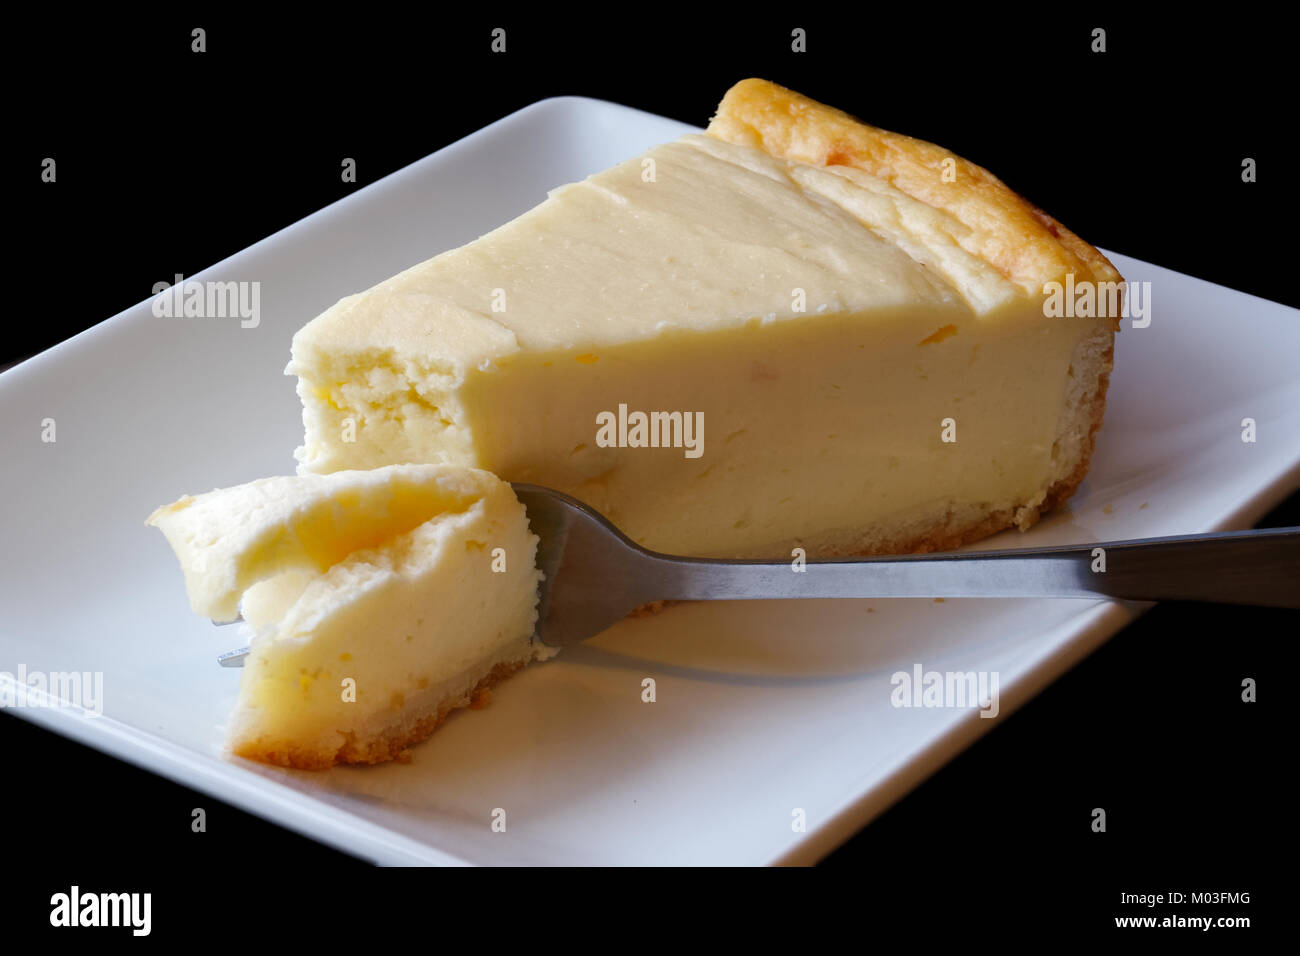 Plain baked cheesecake with cake on fork on white ceramic plate. Black background. Stock Photo